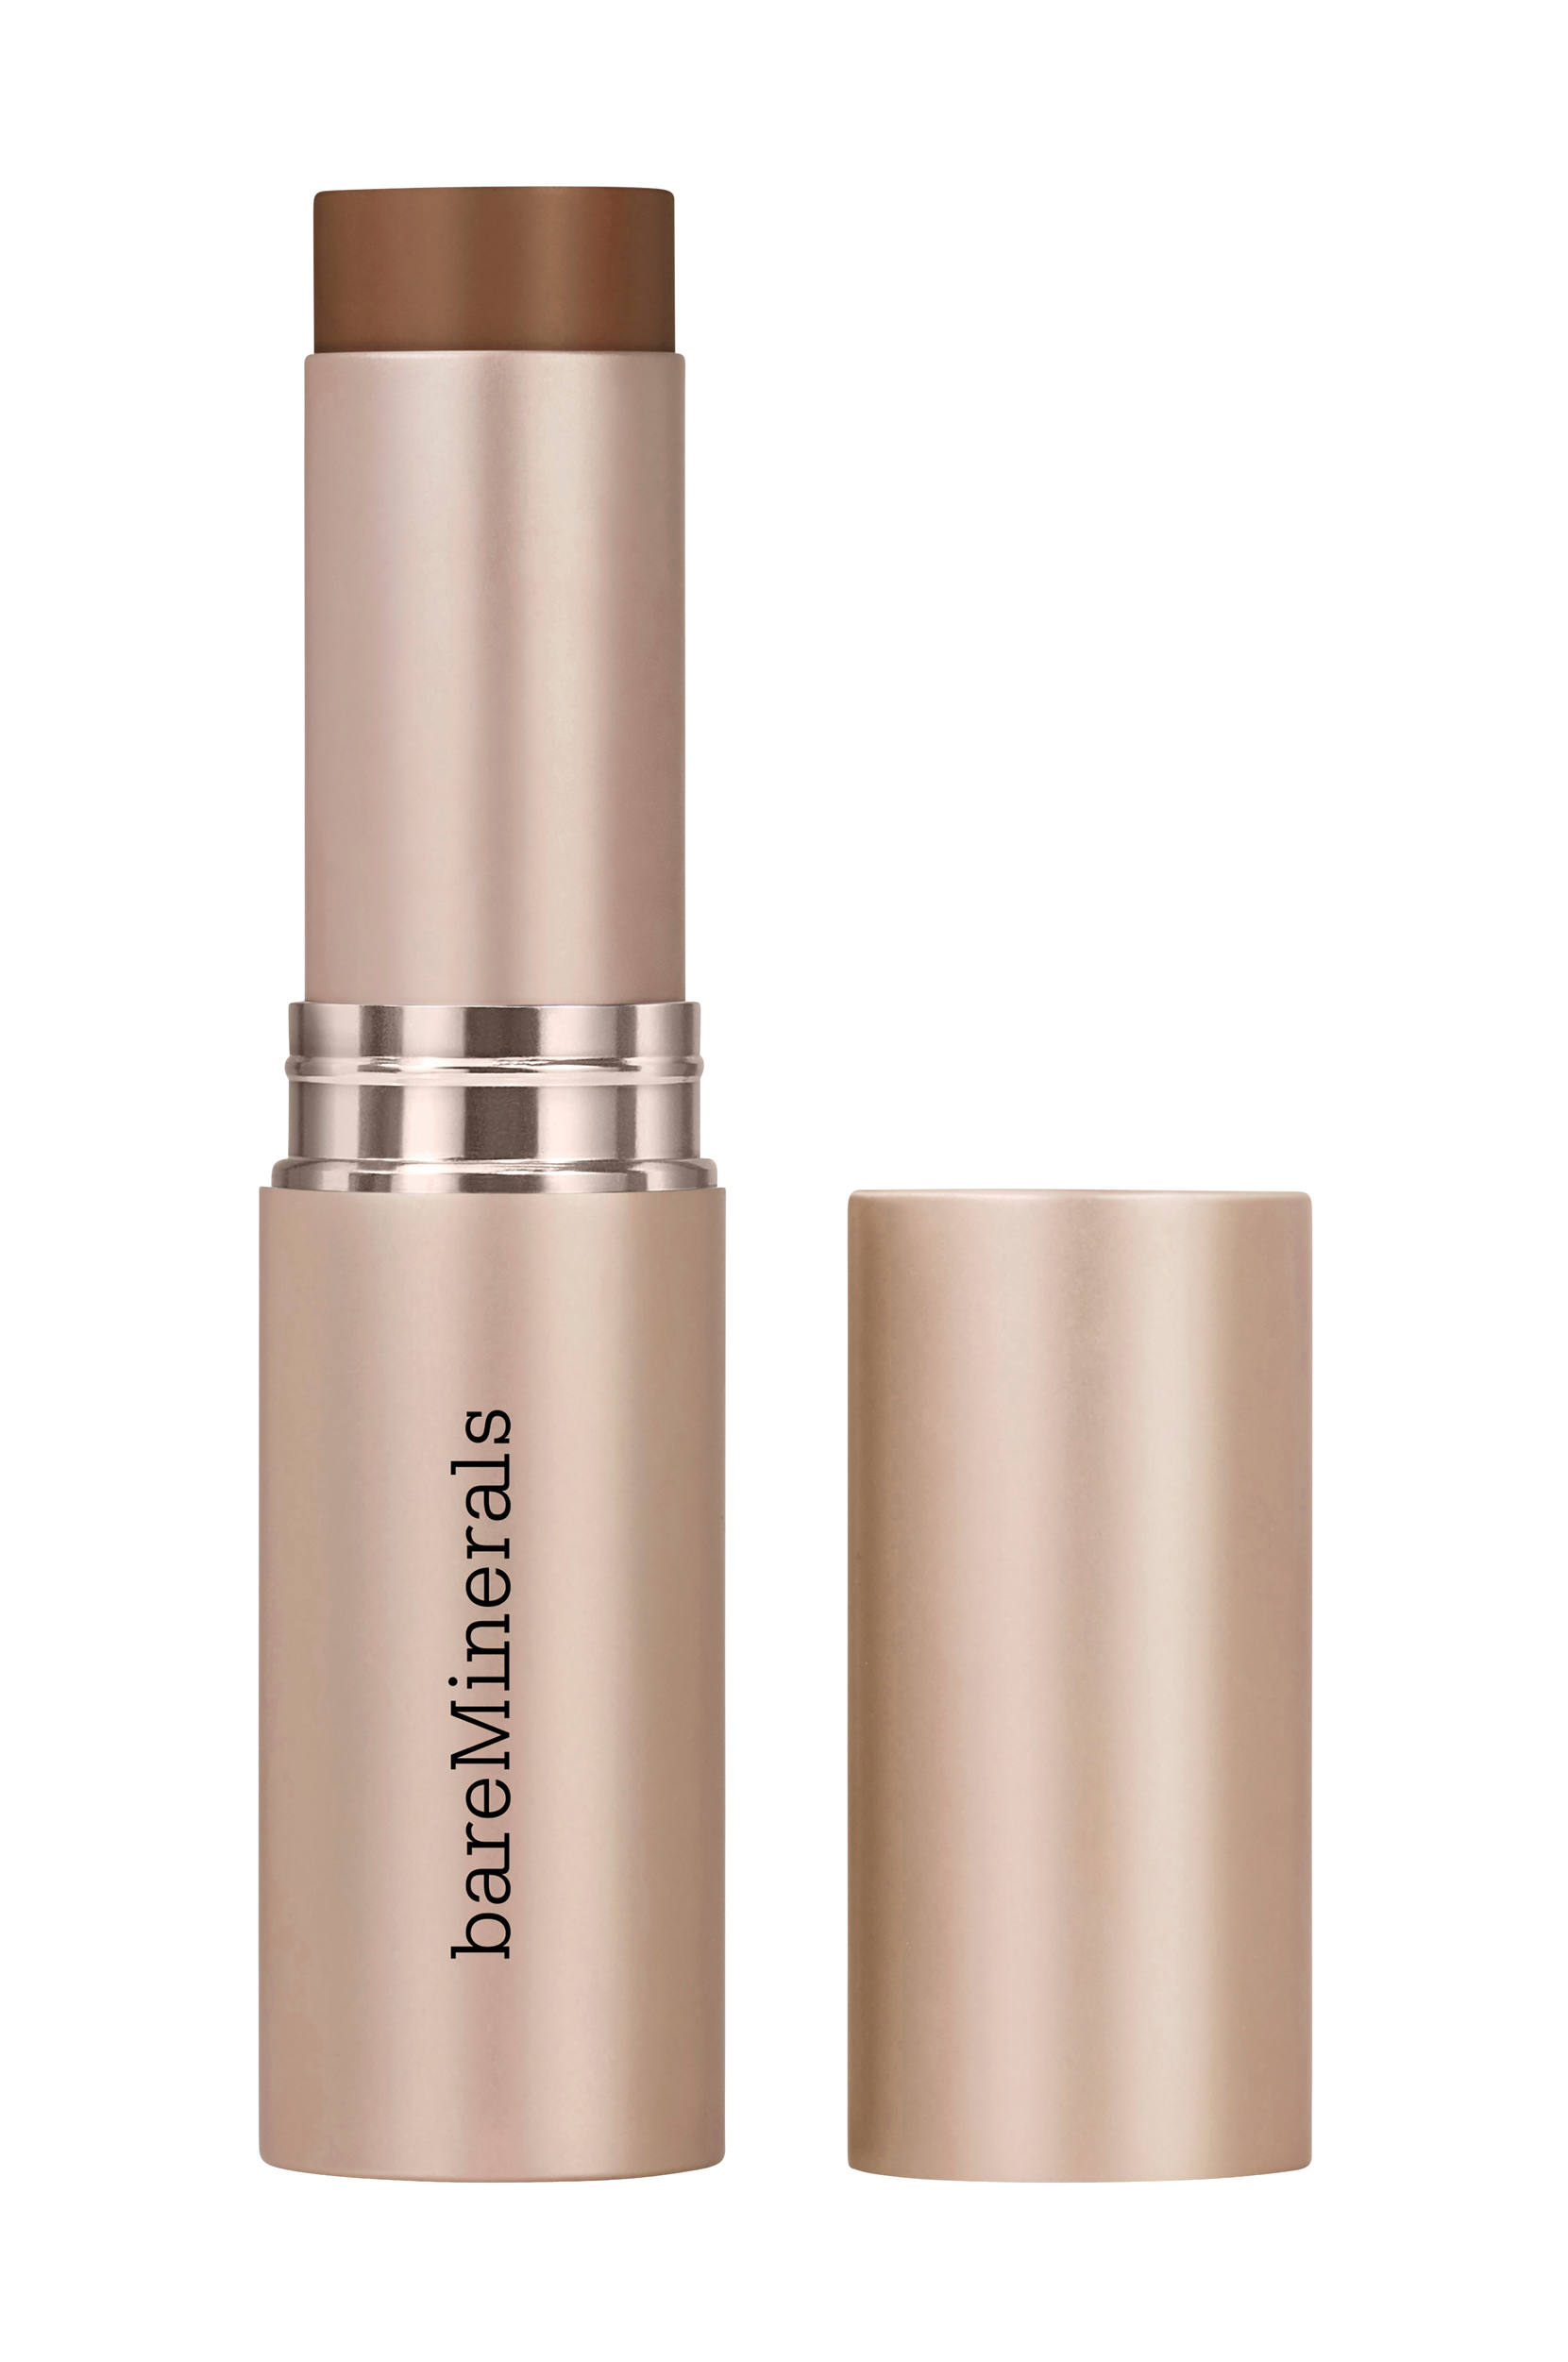 Complexion Rescue Hydrating Foundation Stick SPF 25 Opal 01. 10 g, bareMinerals